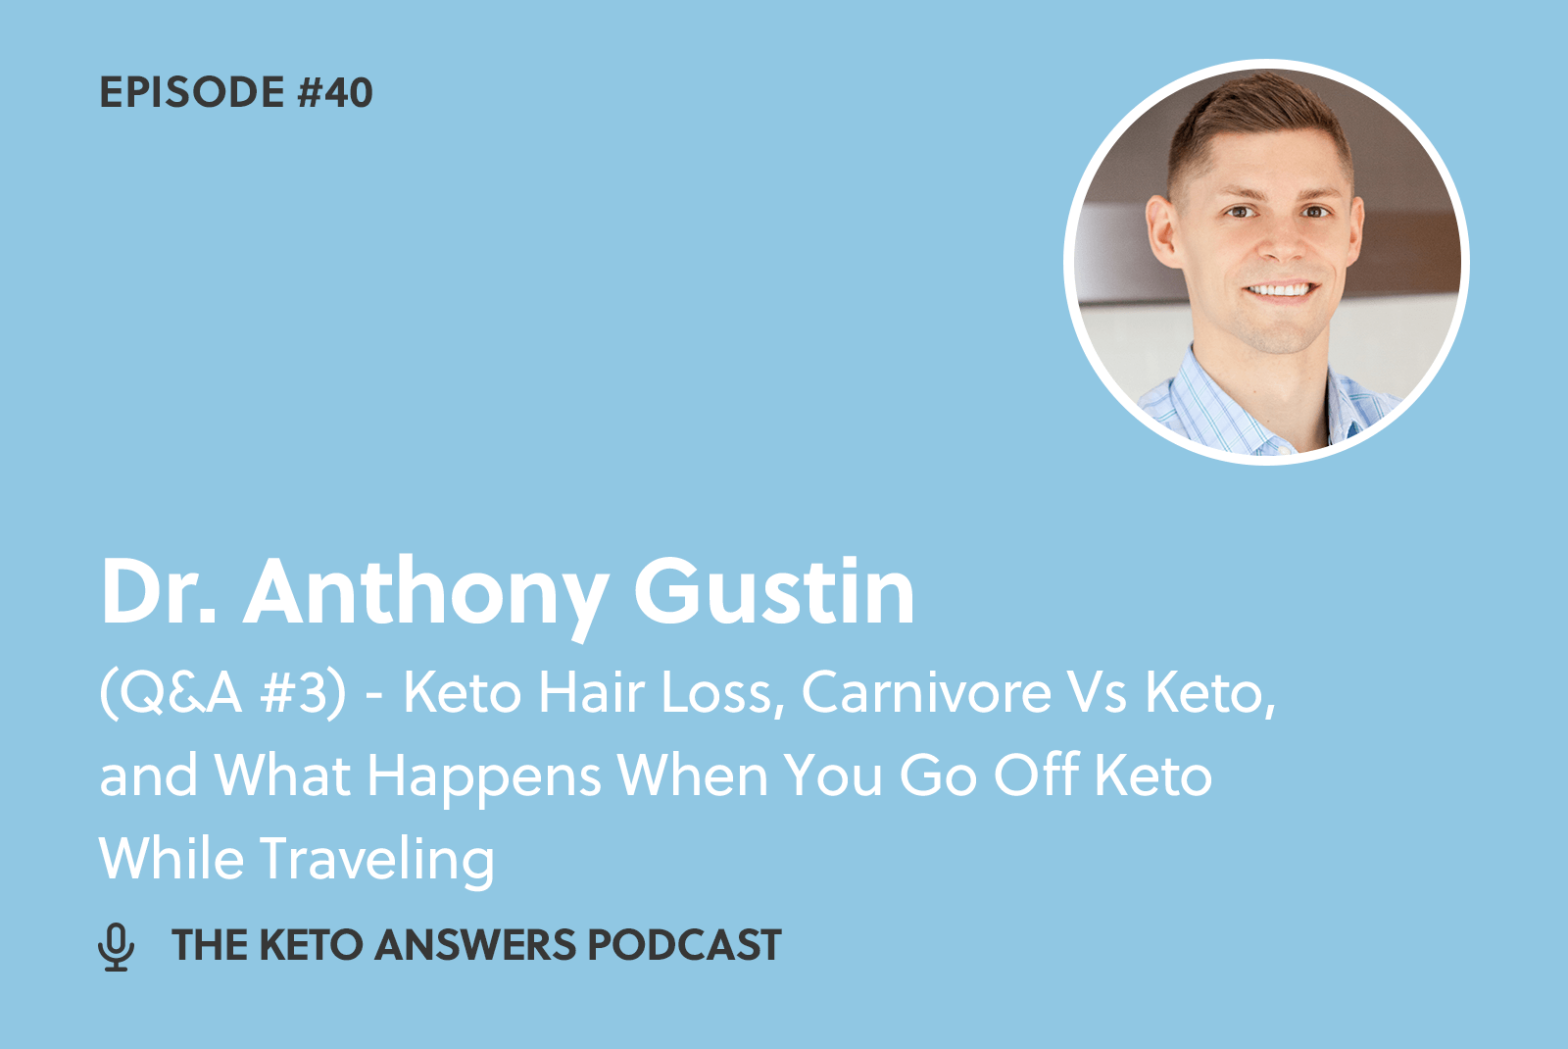 040: Dr. Anthony Gustin - (Q&A #3) - Keto Hair Loss, Carnivore Vs Keto, And  What Happens When You Go Off Keto While Traveling - Dr. Anthony Gustin